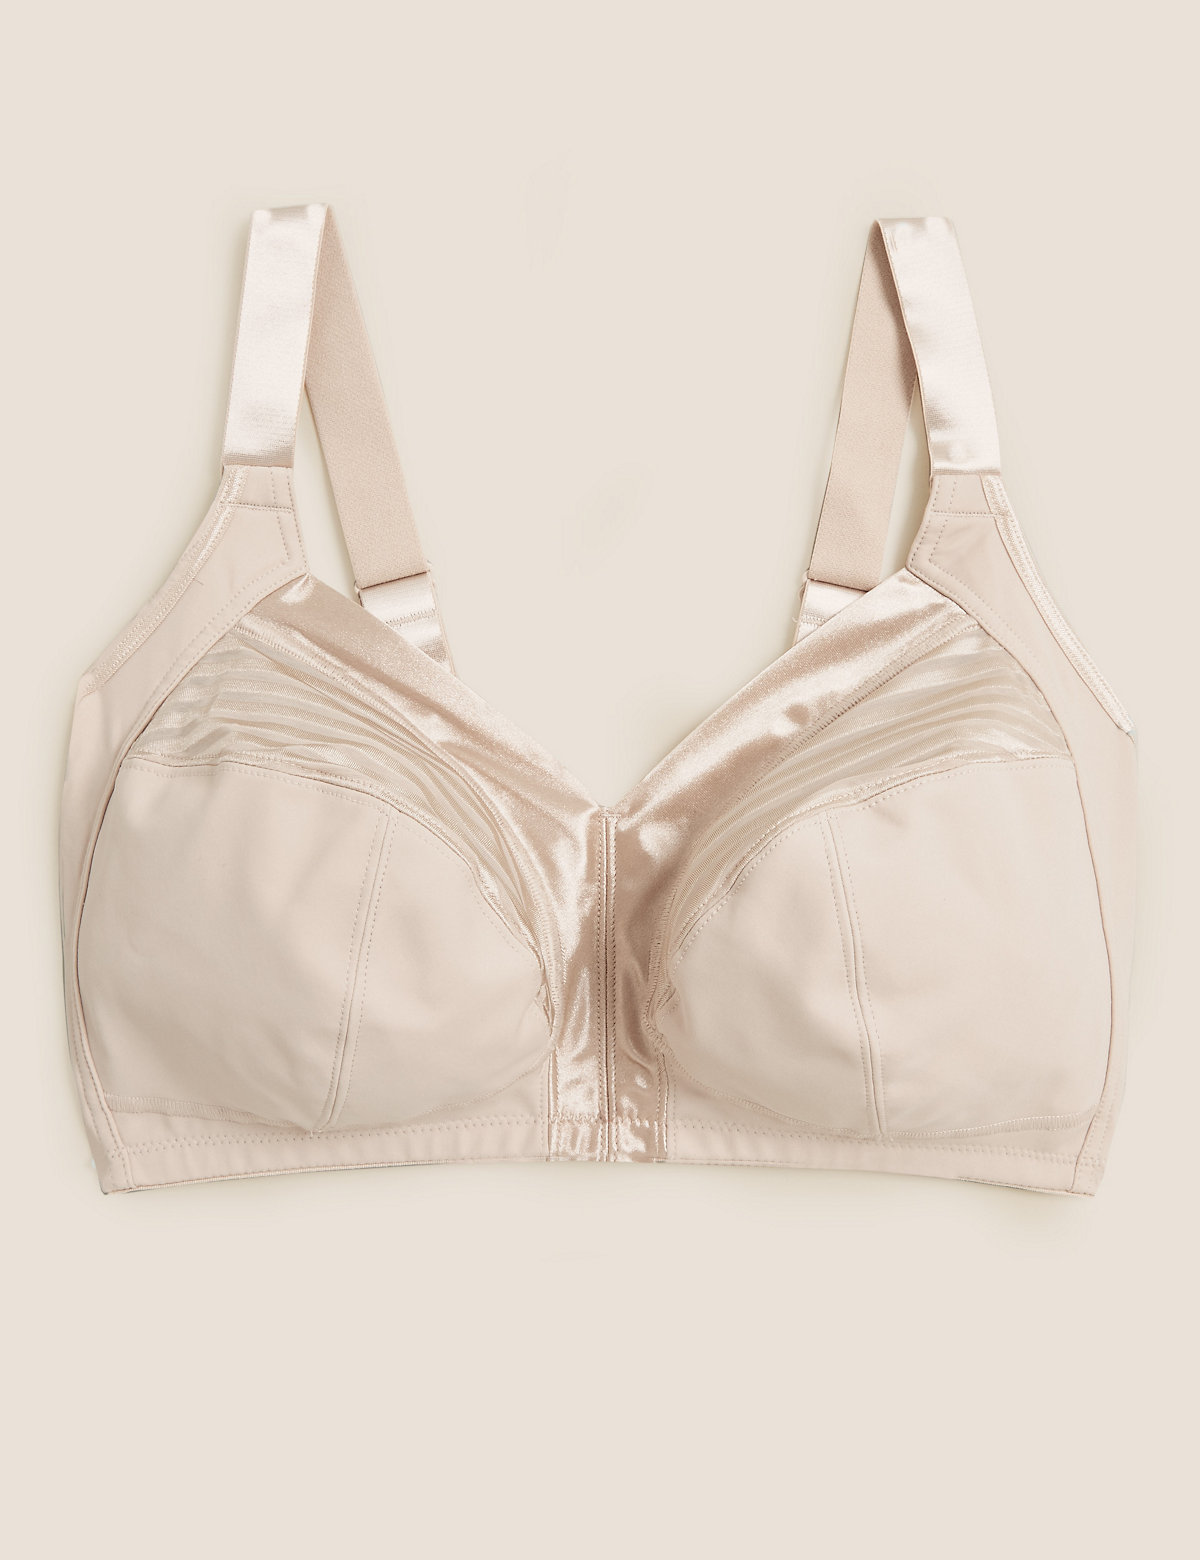 Total Support Non-Wired Full Cup Bra B-H